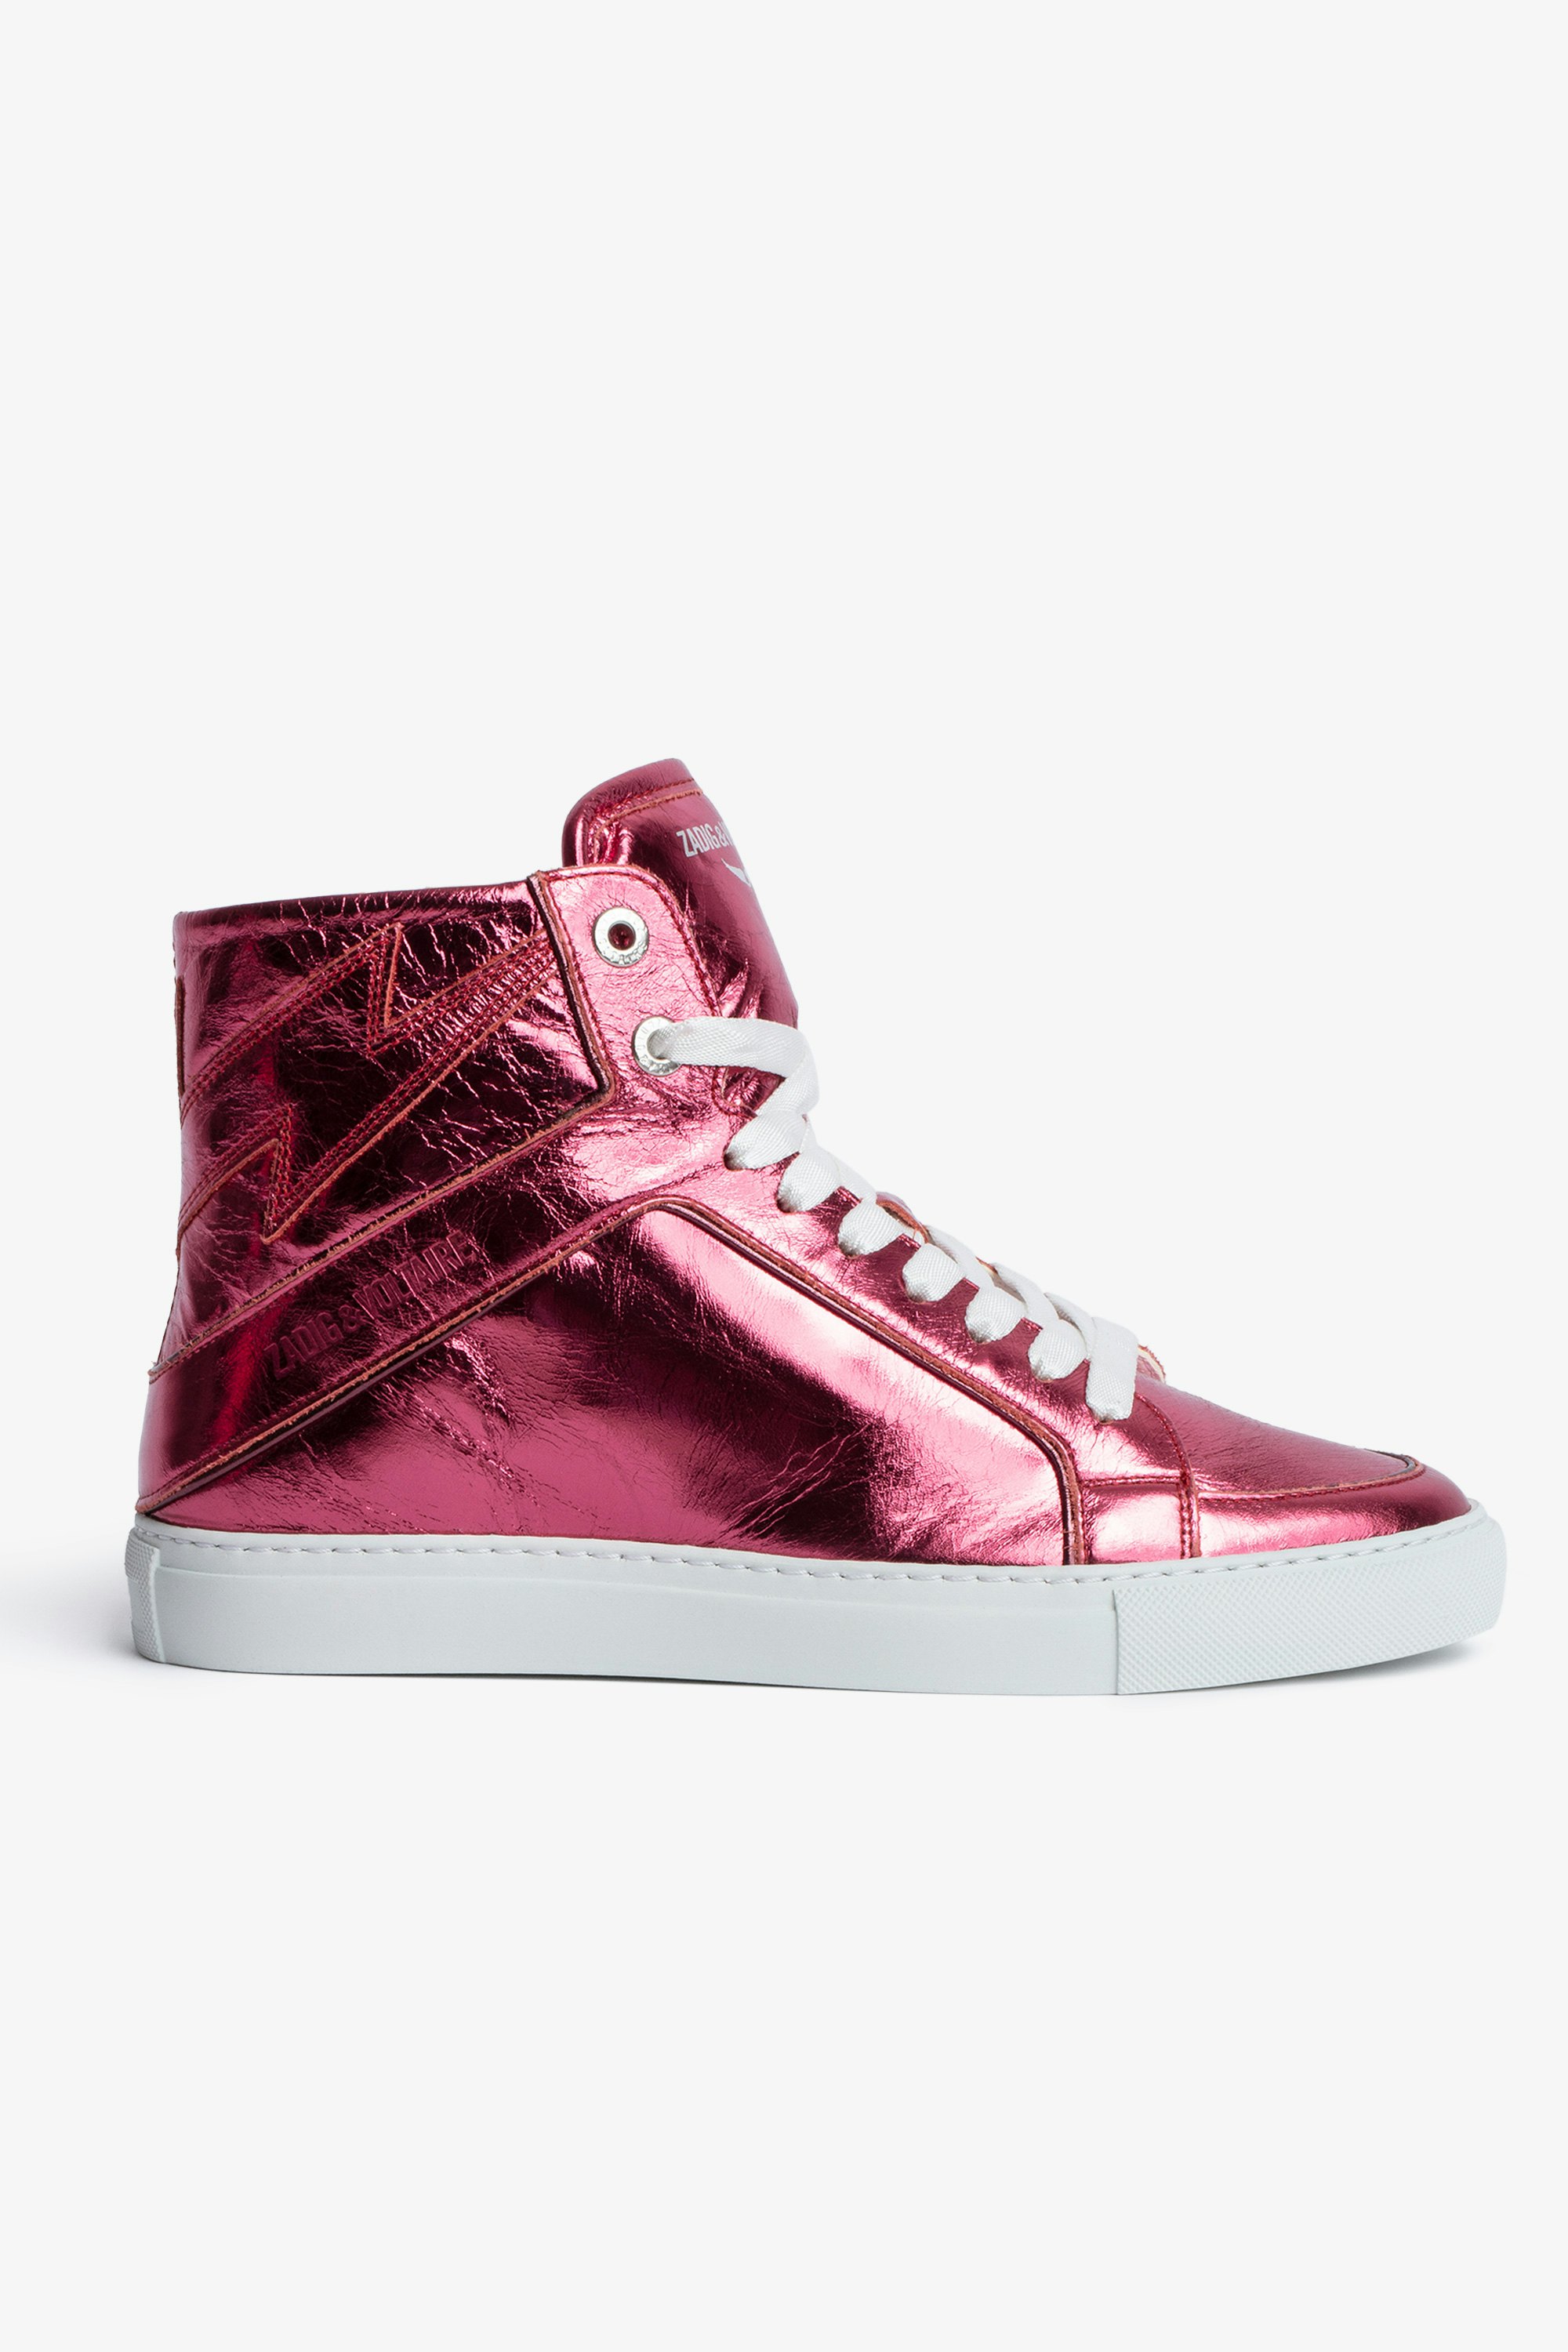 ZV1747 High Flash スニーカー Pink metallic leather high-top sneakers 